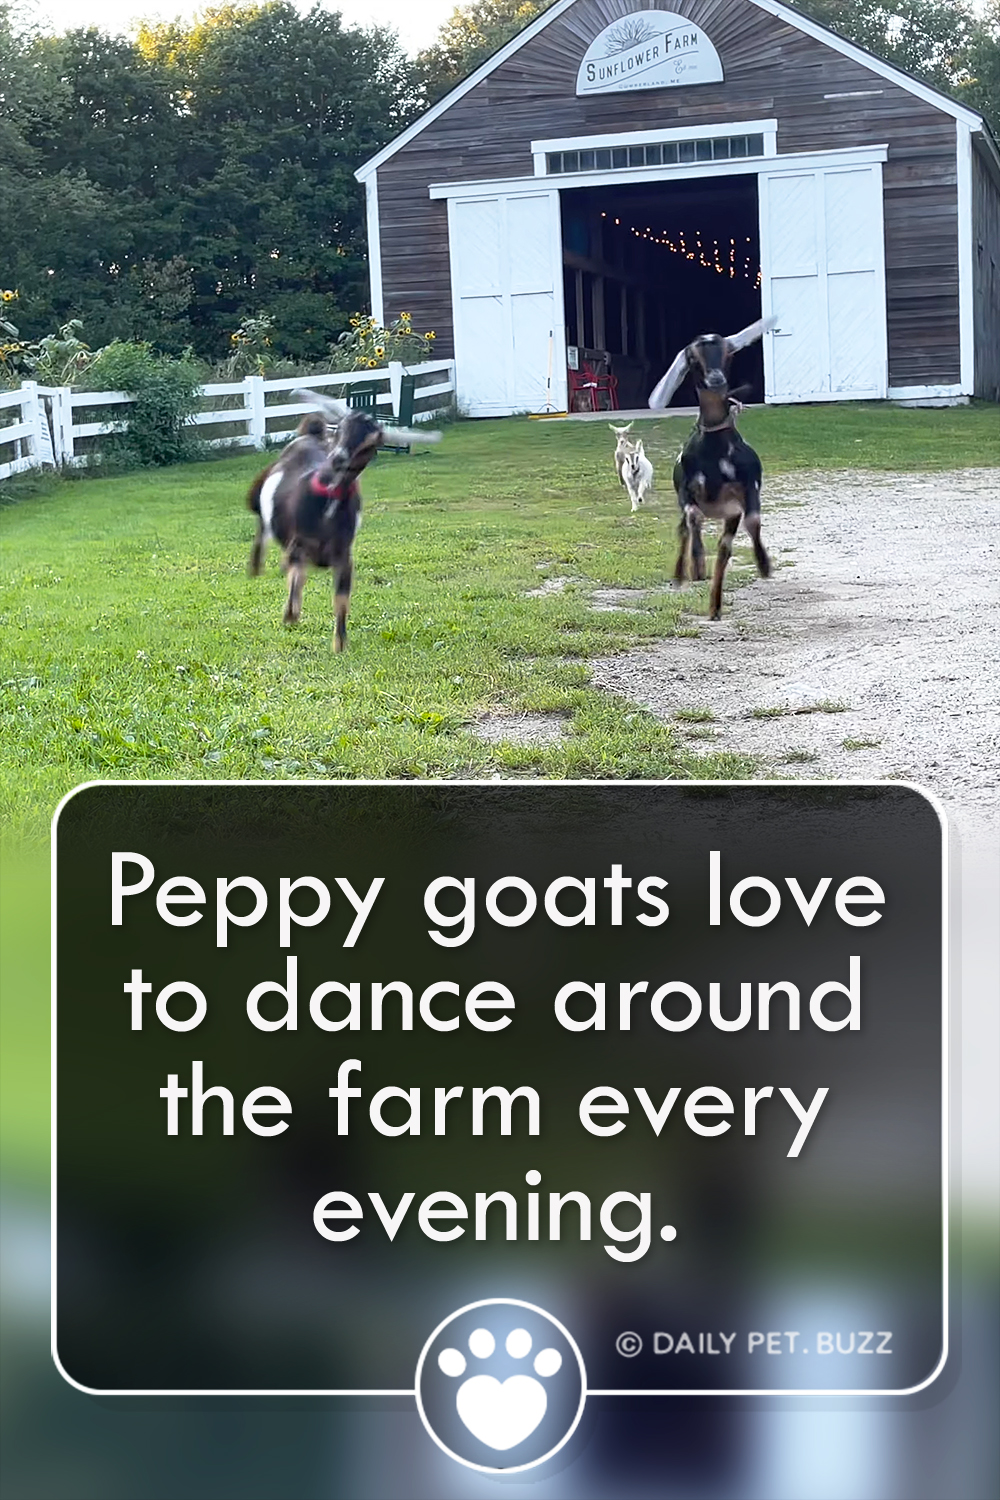 Peppy goats love to dance around the farm every evening.